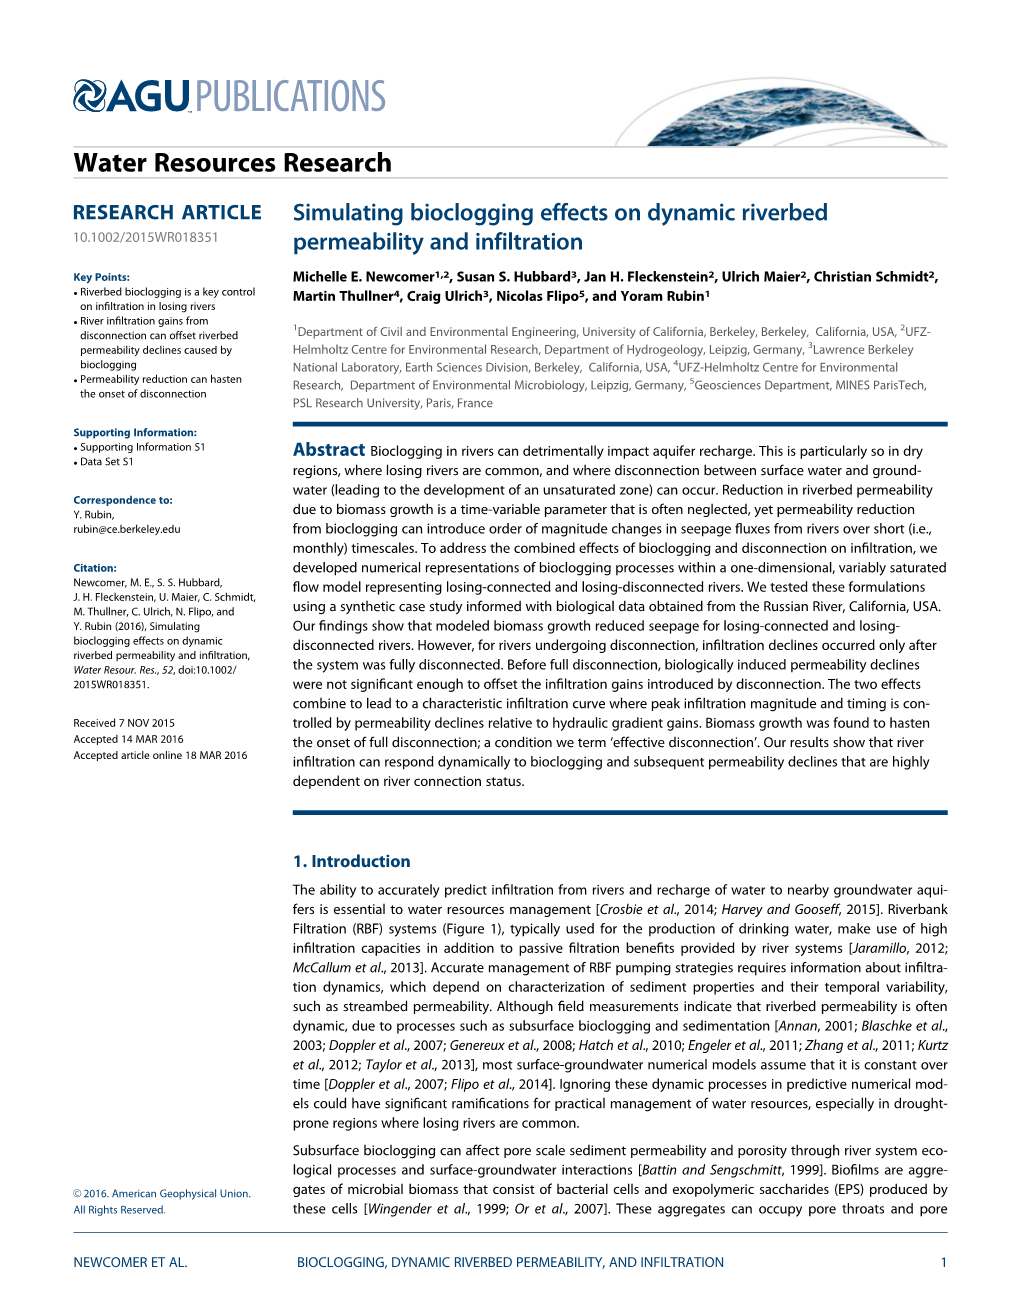 Simulating Bioclogging Effects on Dynamic Riverbed Permeability And